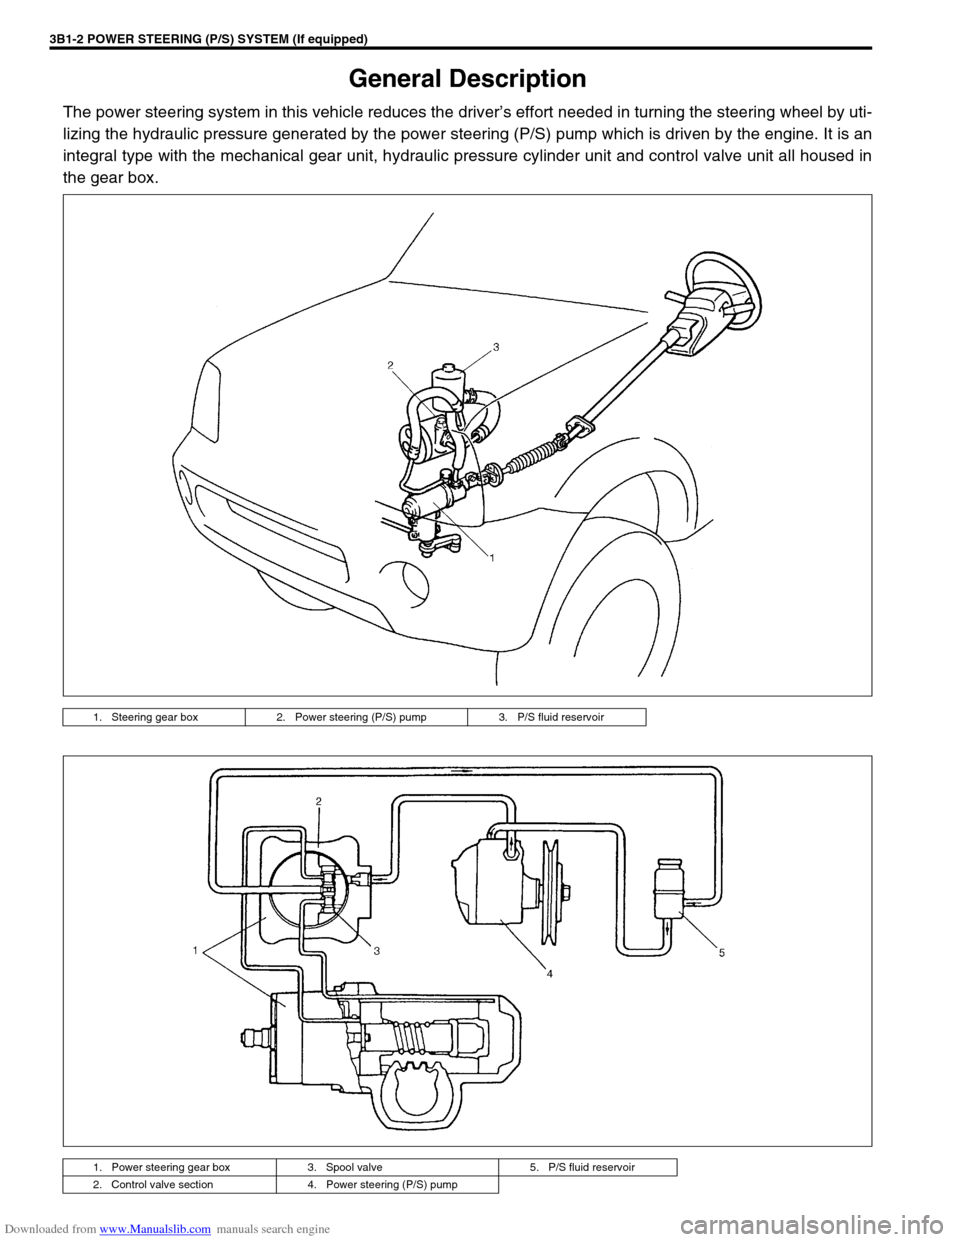 SUZUKI JIMNY 2005 3.G Service Owners Guide Downloaded from www.Manualslib.com manuals search engine 3B1-2 POWER STEERING (P/S) SYSTEM (If equipped)
General Description
The power steering system in this vehicle reduces the driver’s effort nee